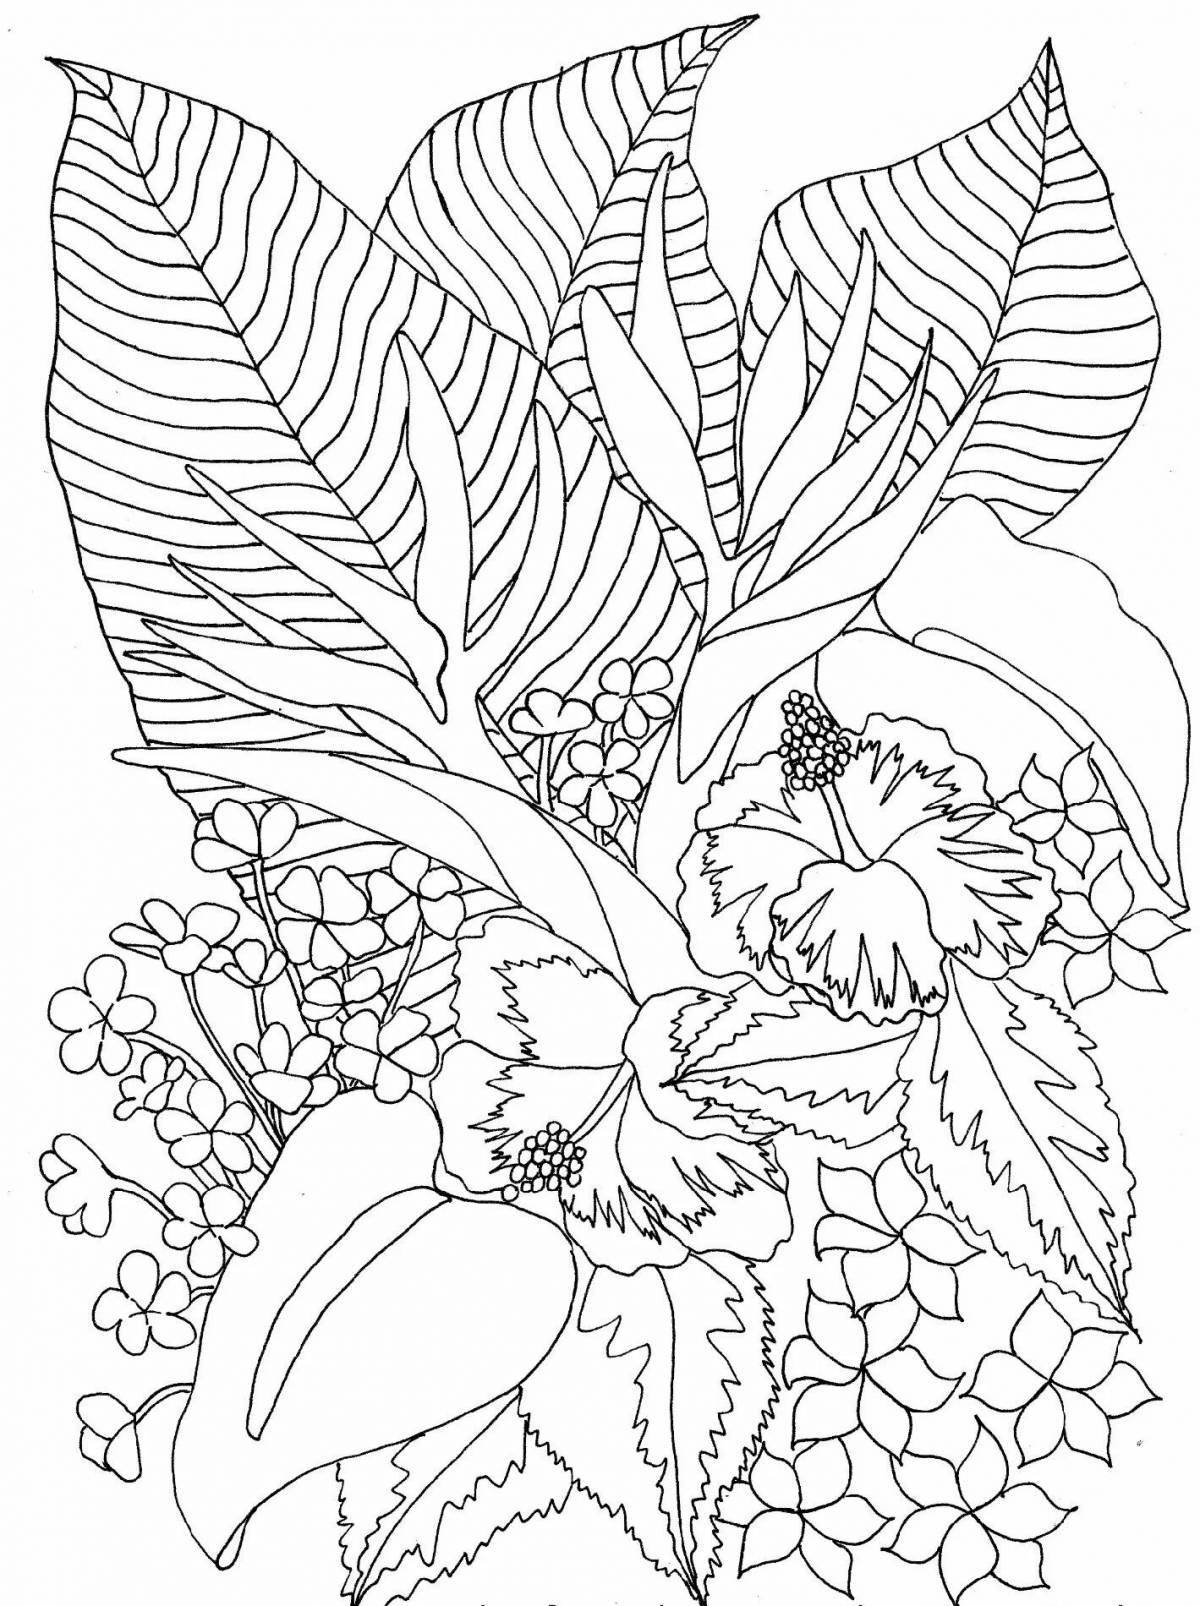 Tropics glowing coloring pages